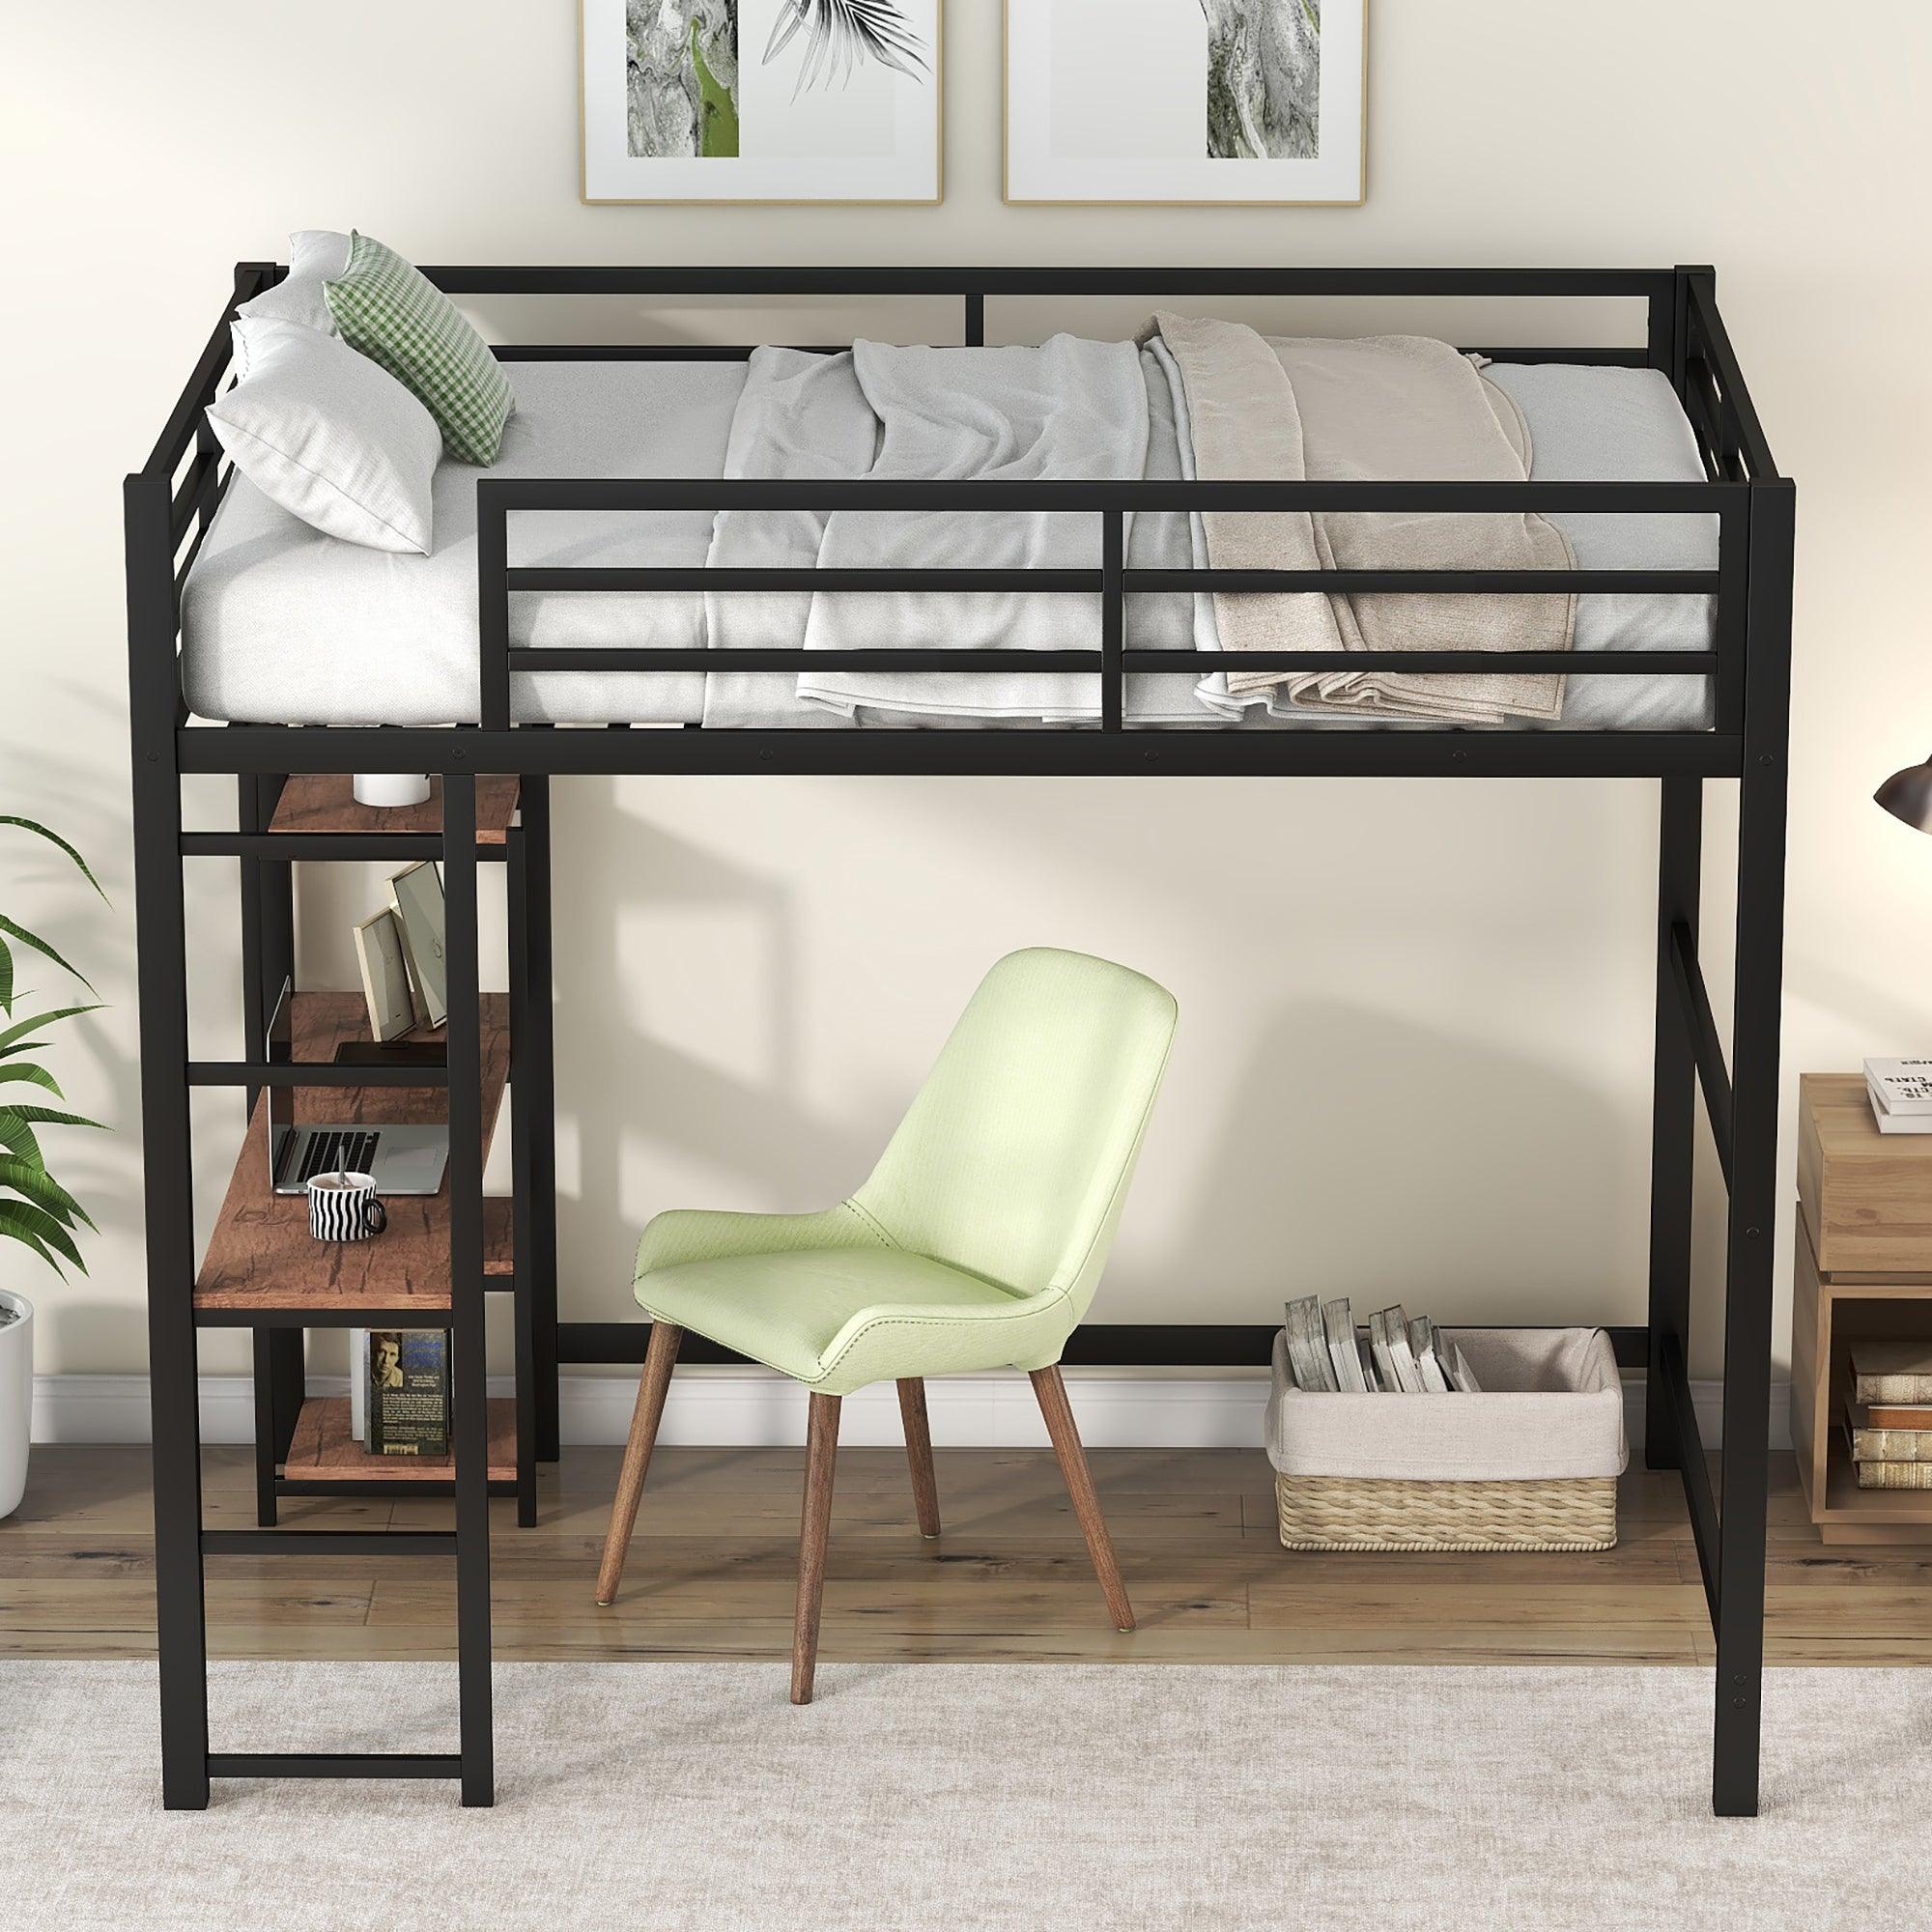 🆓🚛 Full Size Metal Loft Bed With Built-in Desk and Storage Shelves, Black